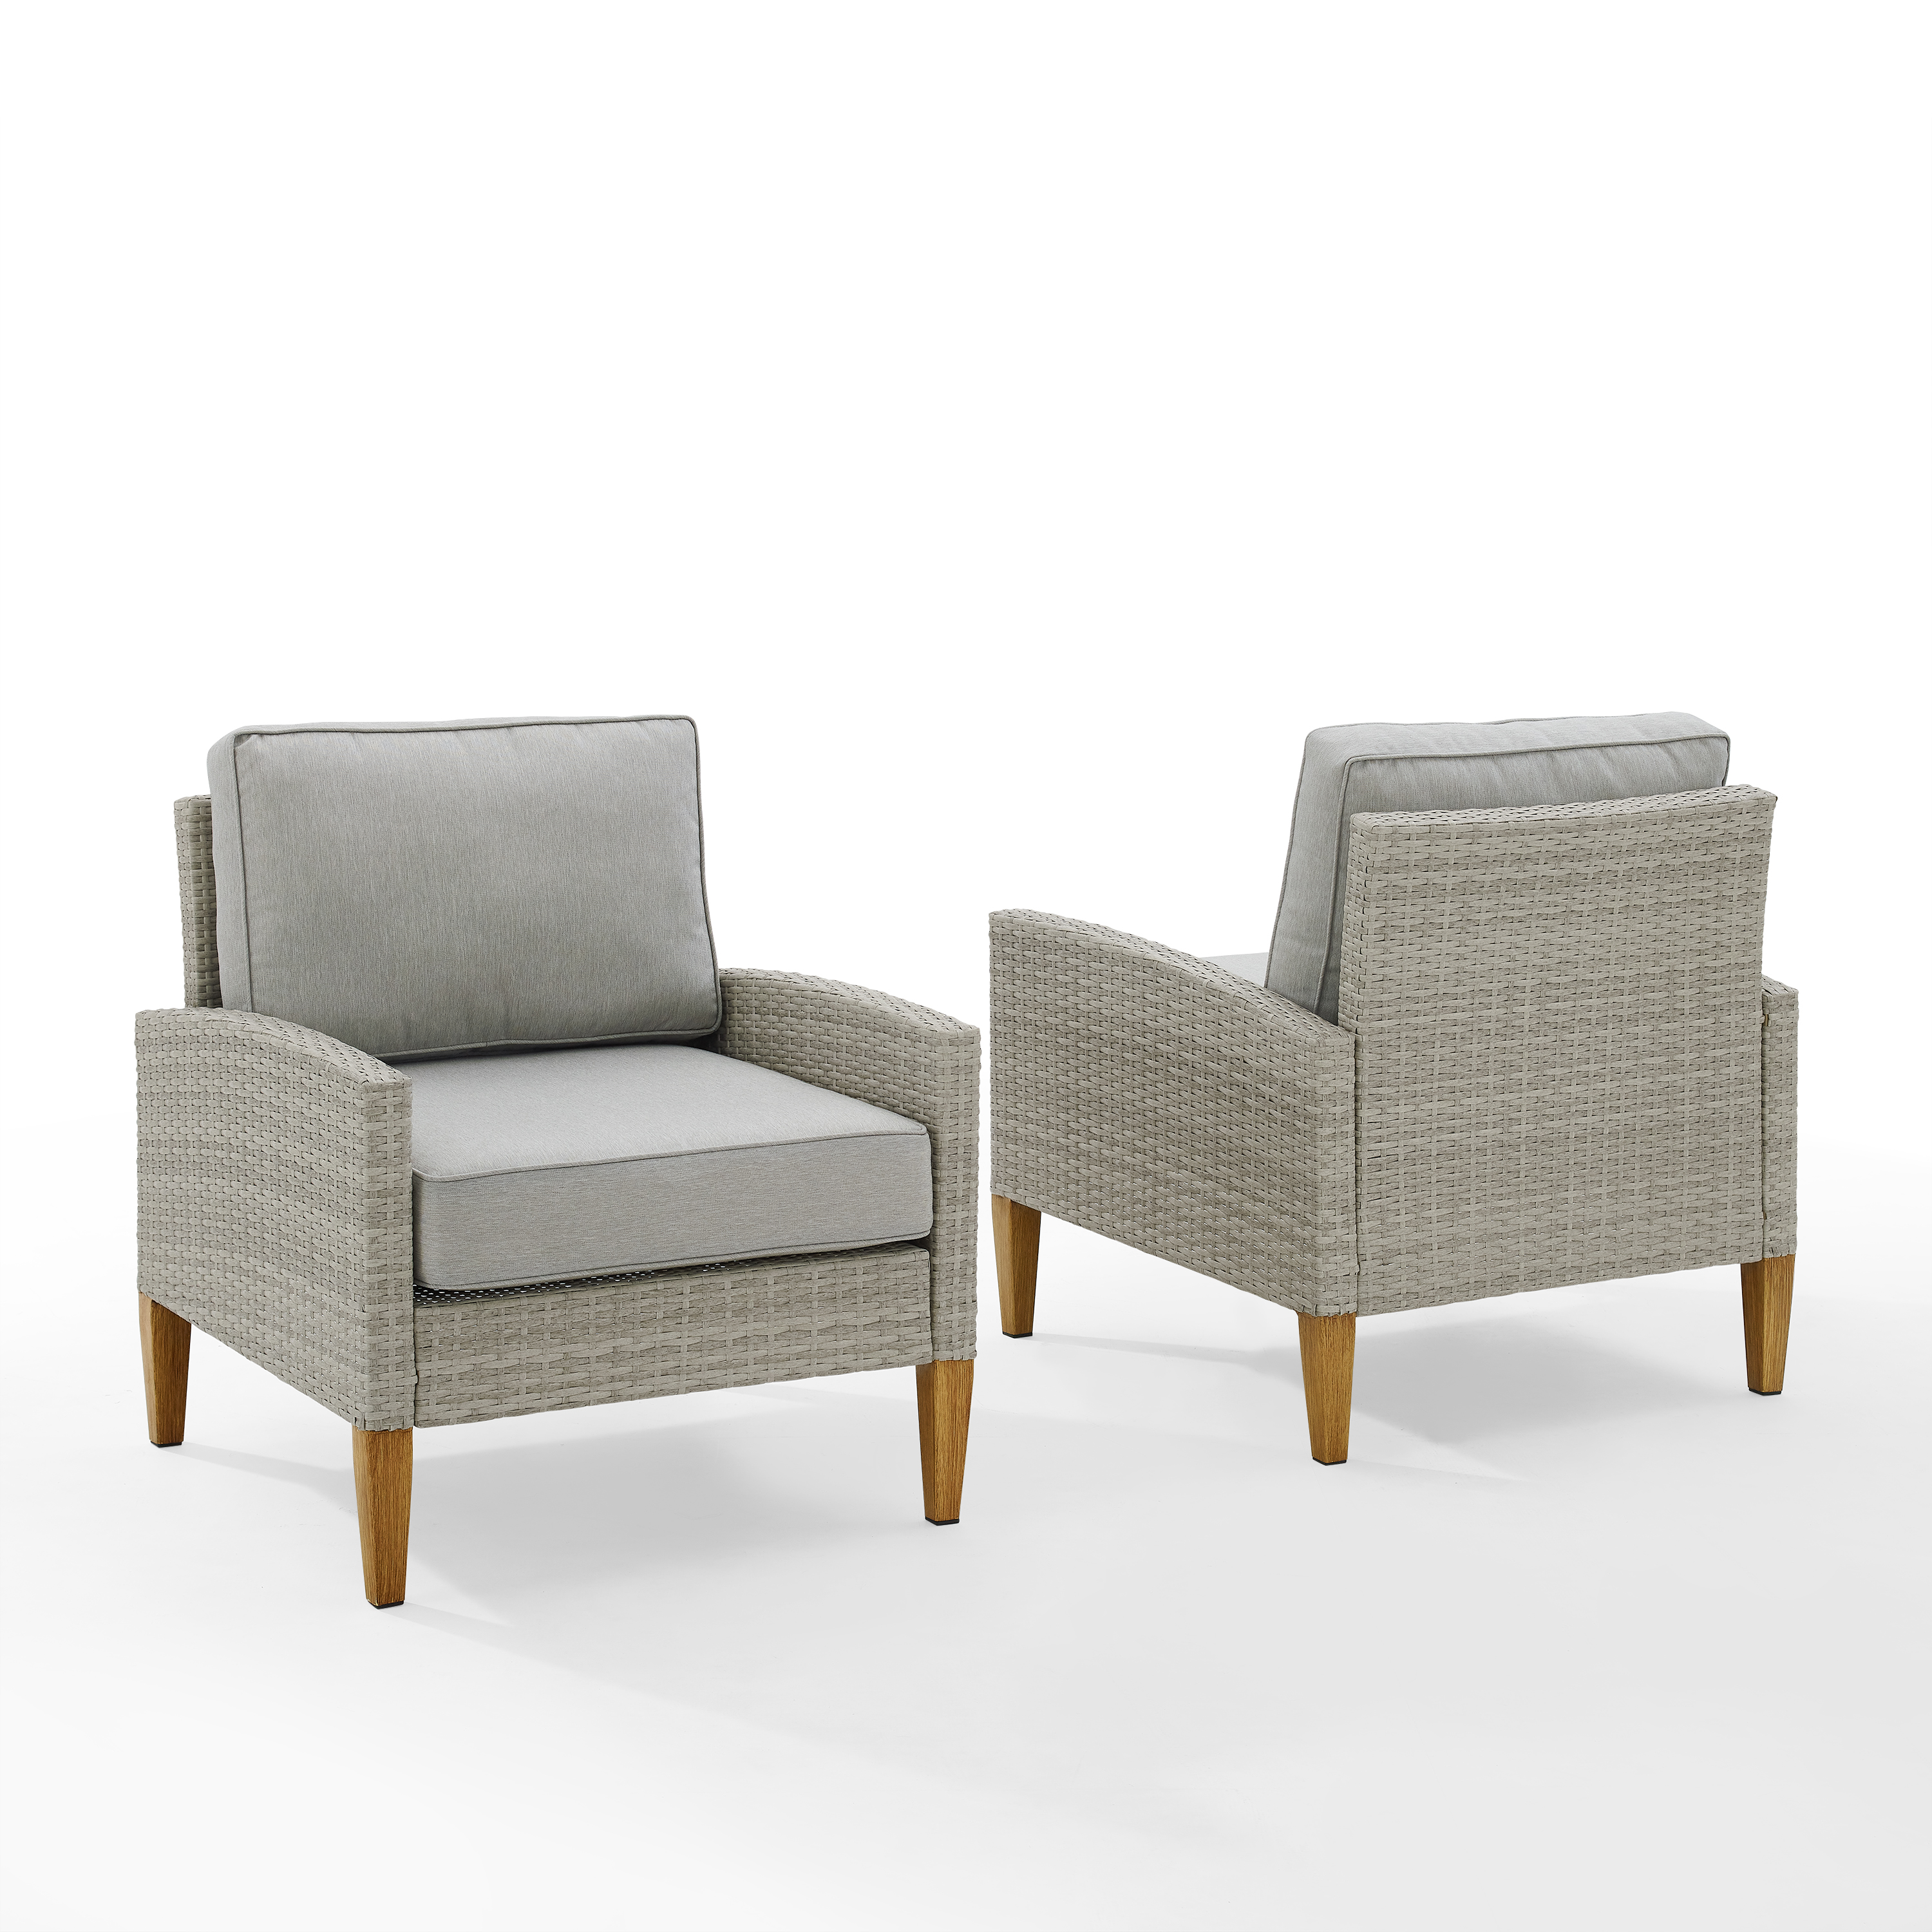 Crosley Furniture Capella Outdoor Wicker 2 Piece Chair Set- 2 Chairs - image 4 of 13